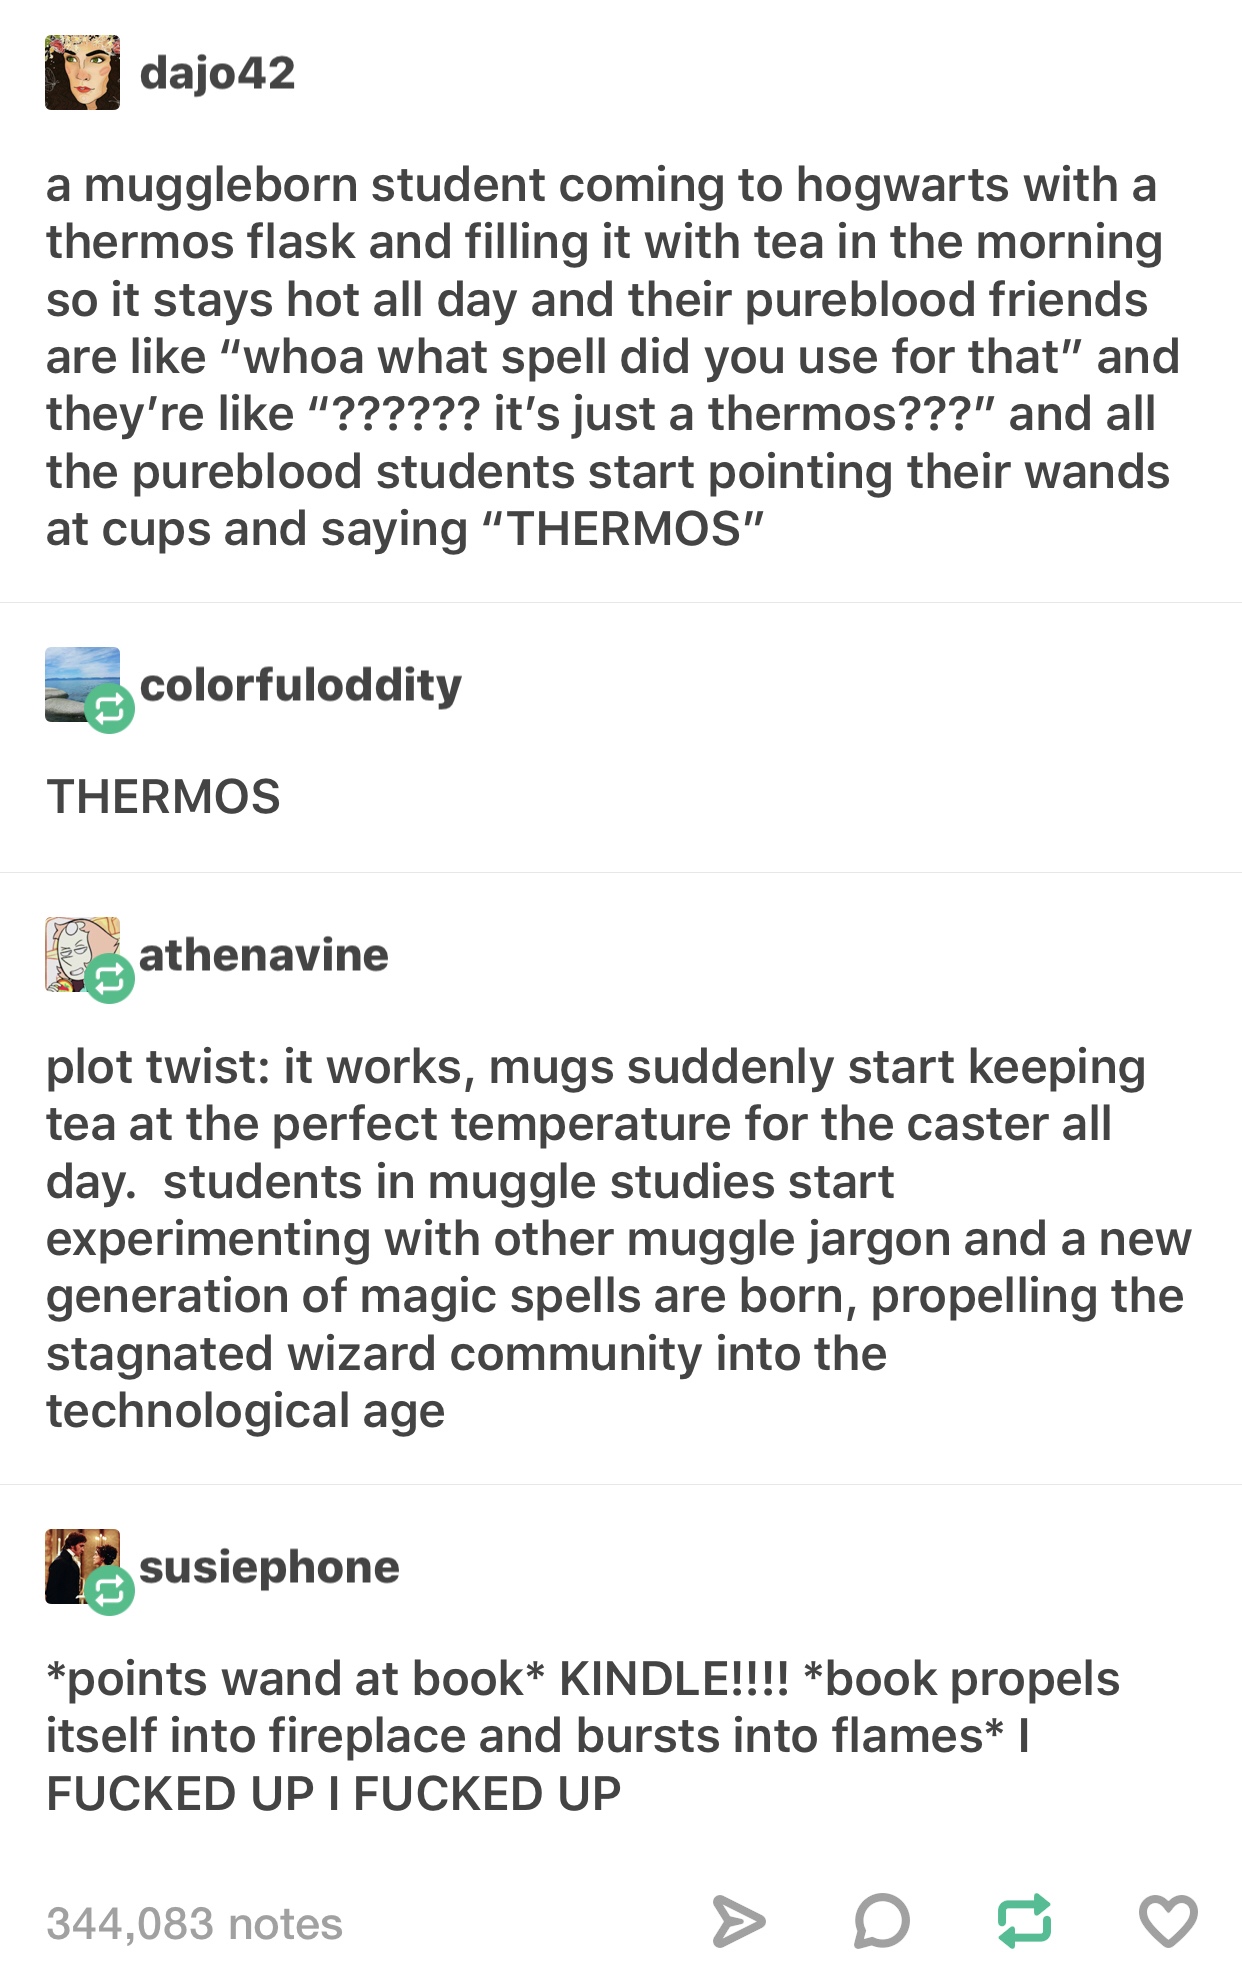 dankness of screenshot - dajo42 a muggleborn student coming to hogwarts with a thermos flask and filling it with tea in the morning so it stays hot all day and their pureblood friends are "whoa what spell did you use for that" and they're "?????? it's jus